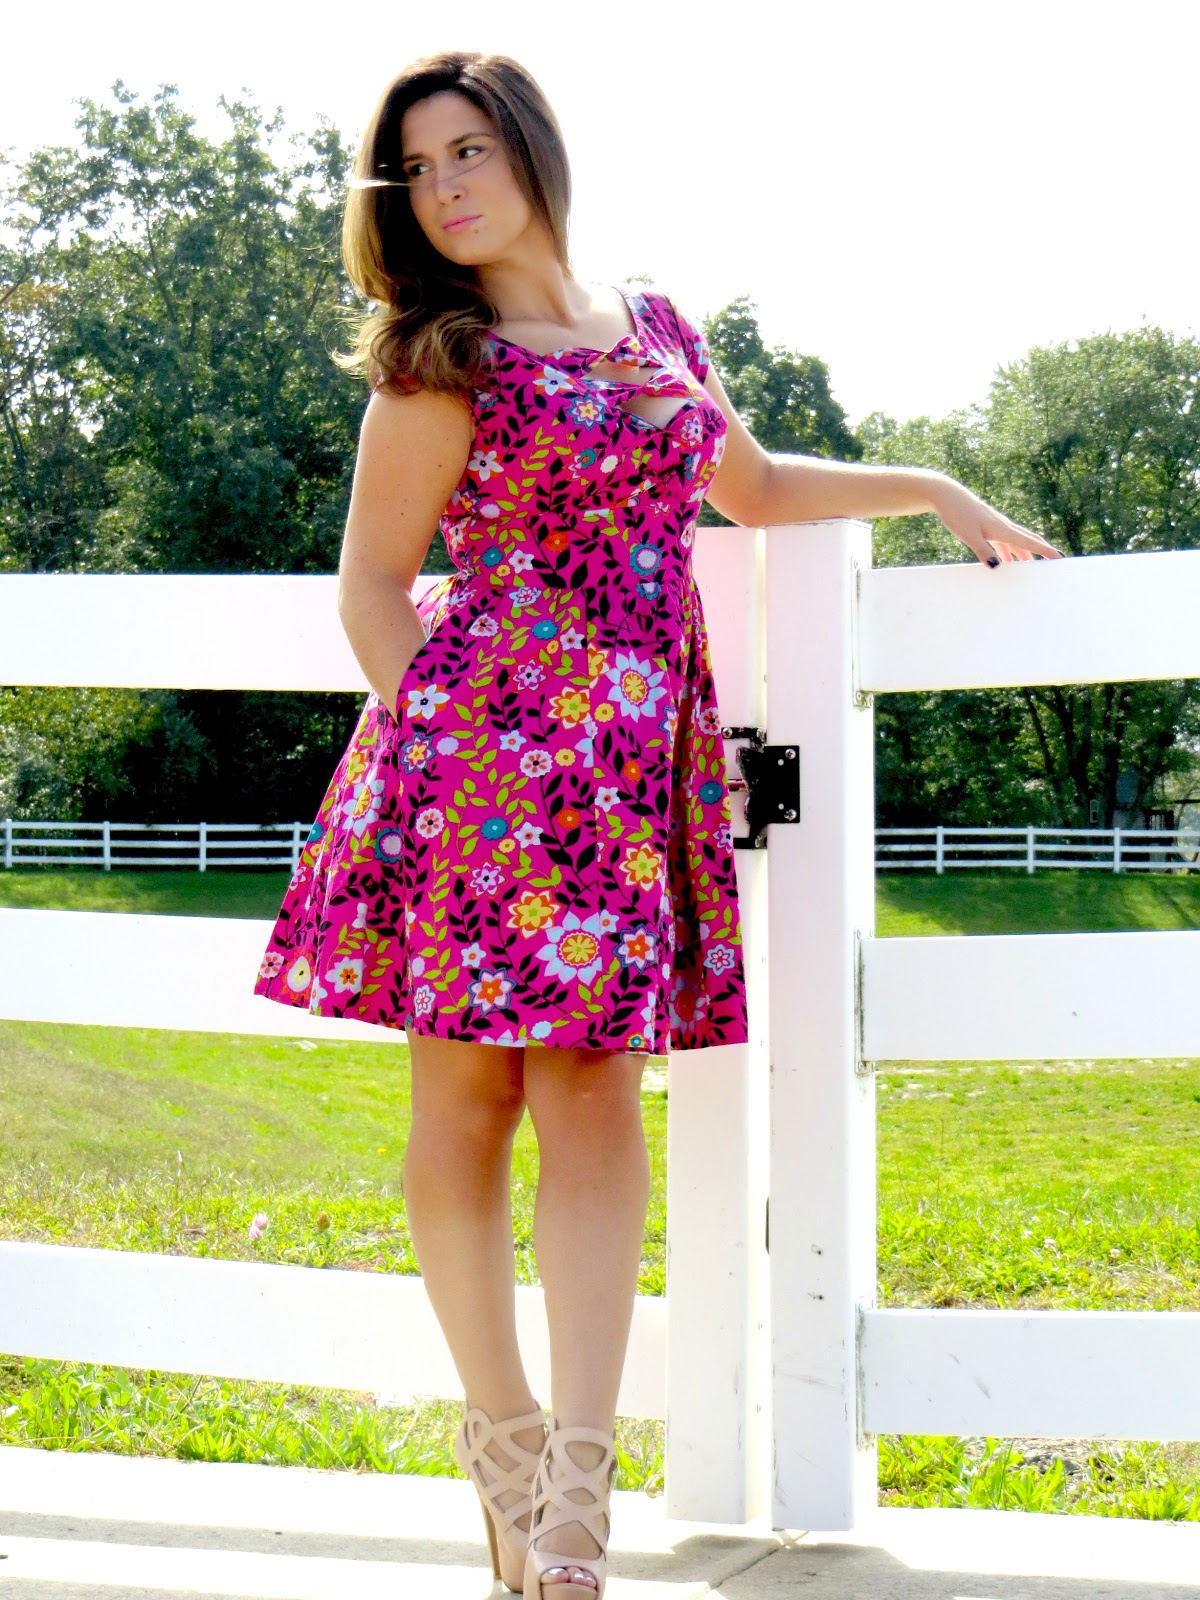 Beautifully Candid: Floral Bow Front Dress-Summer/Fall Transition Wear